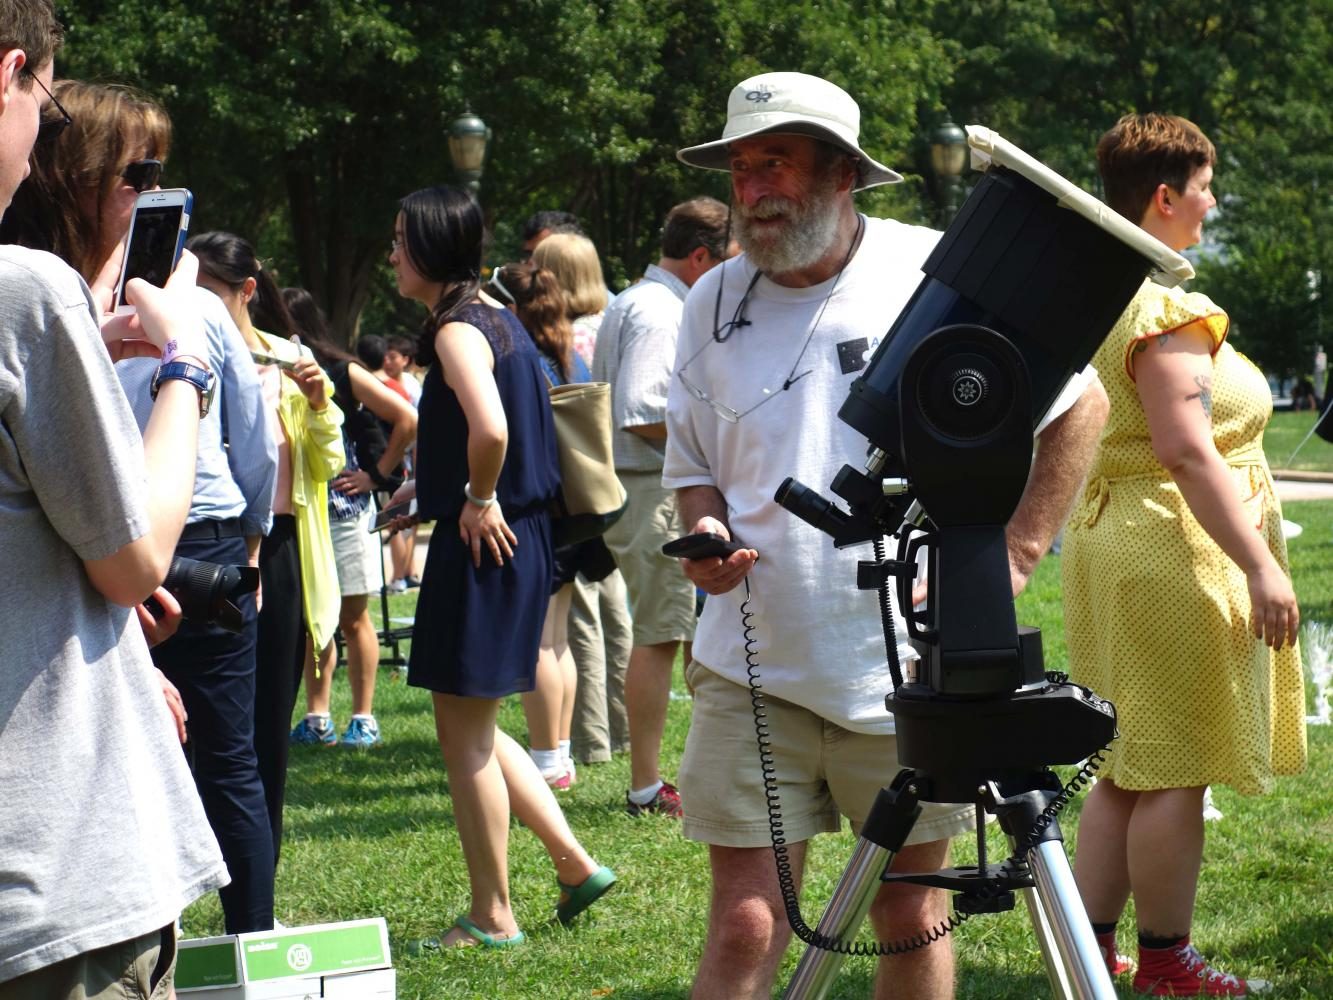 Many+viewed+the+eclipse+from+the+Warner+and+Swasey+Observatory+or+the+Kent+Hale+Smith+Oval.